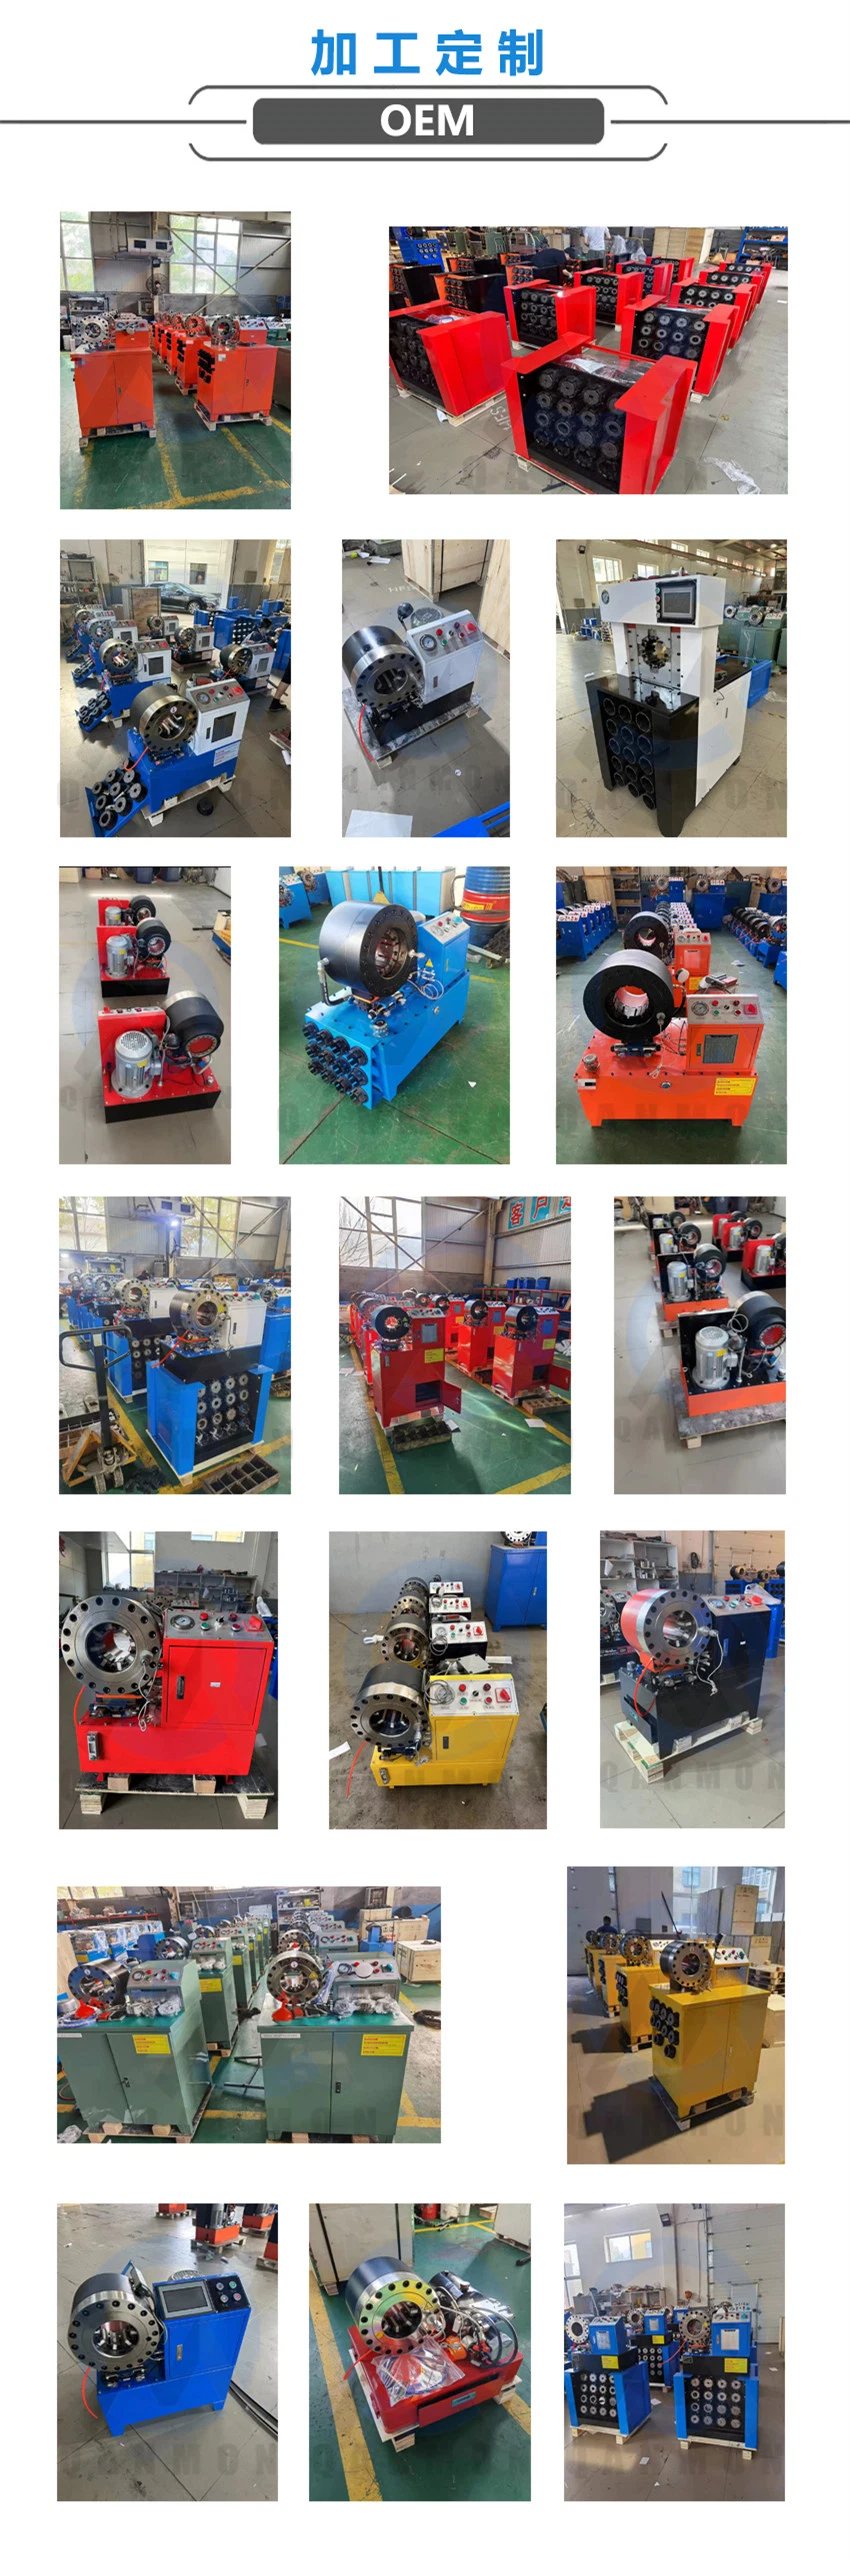 Factory Sales Direct 6-32 Hose Crimping Tool Machine for Cable Lower Pressure Hose Water Hose